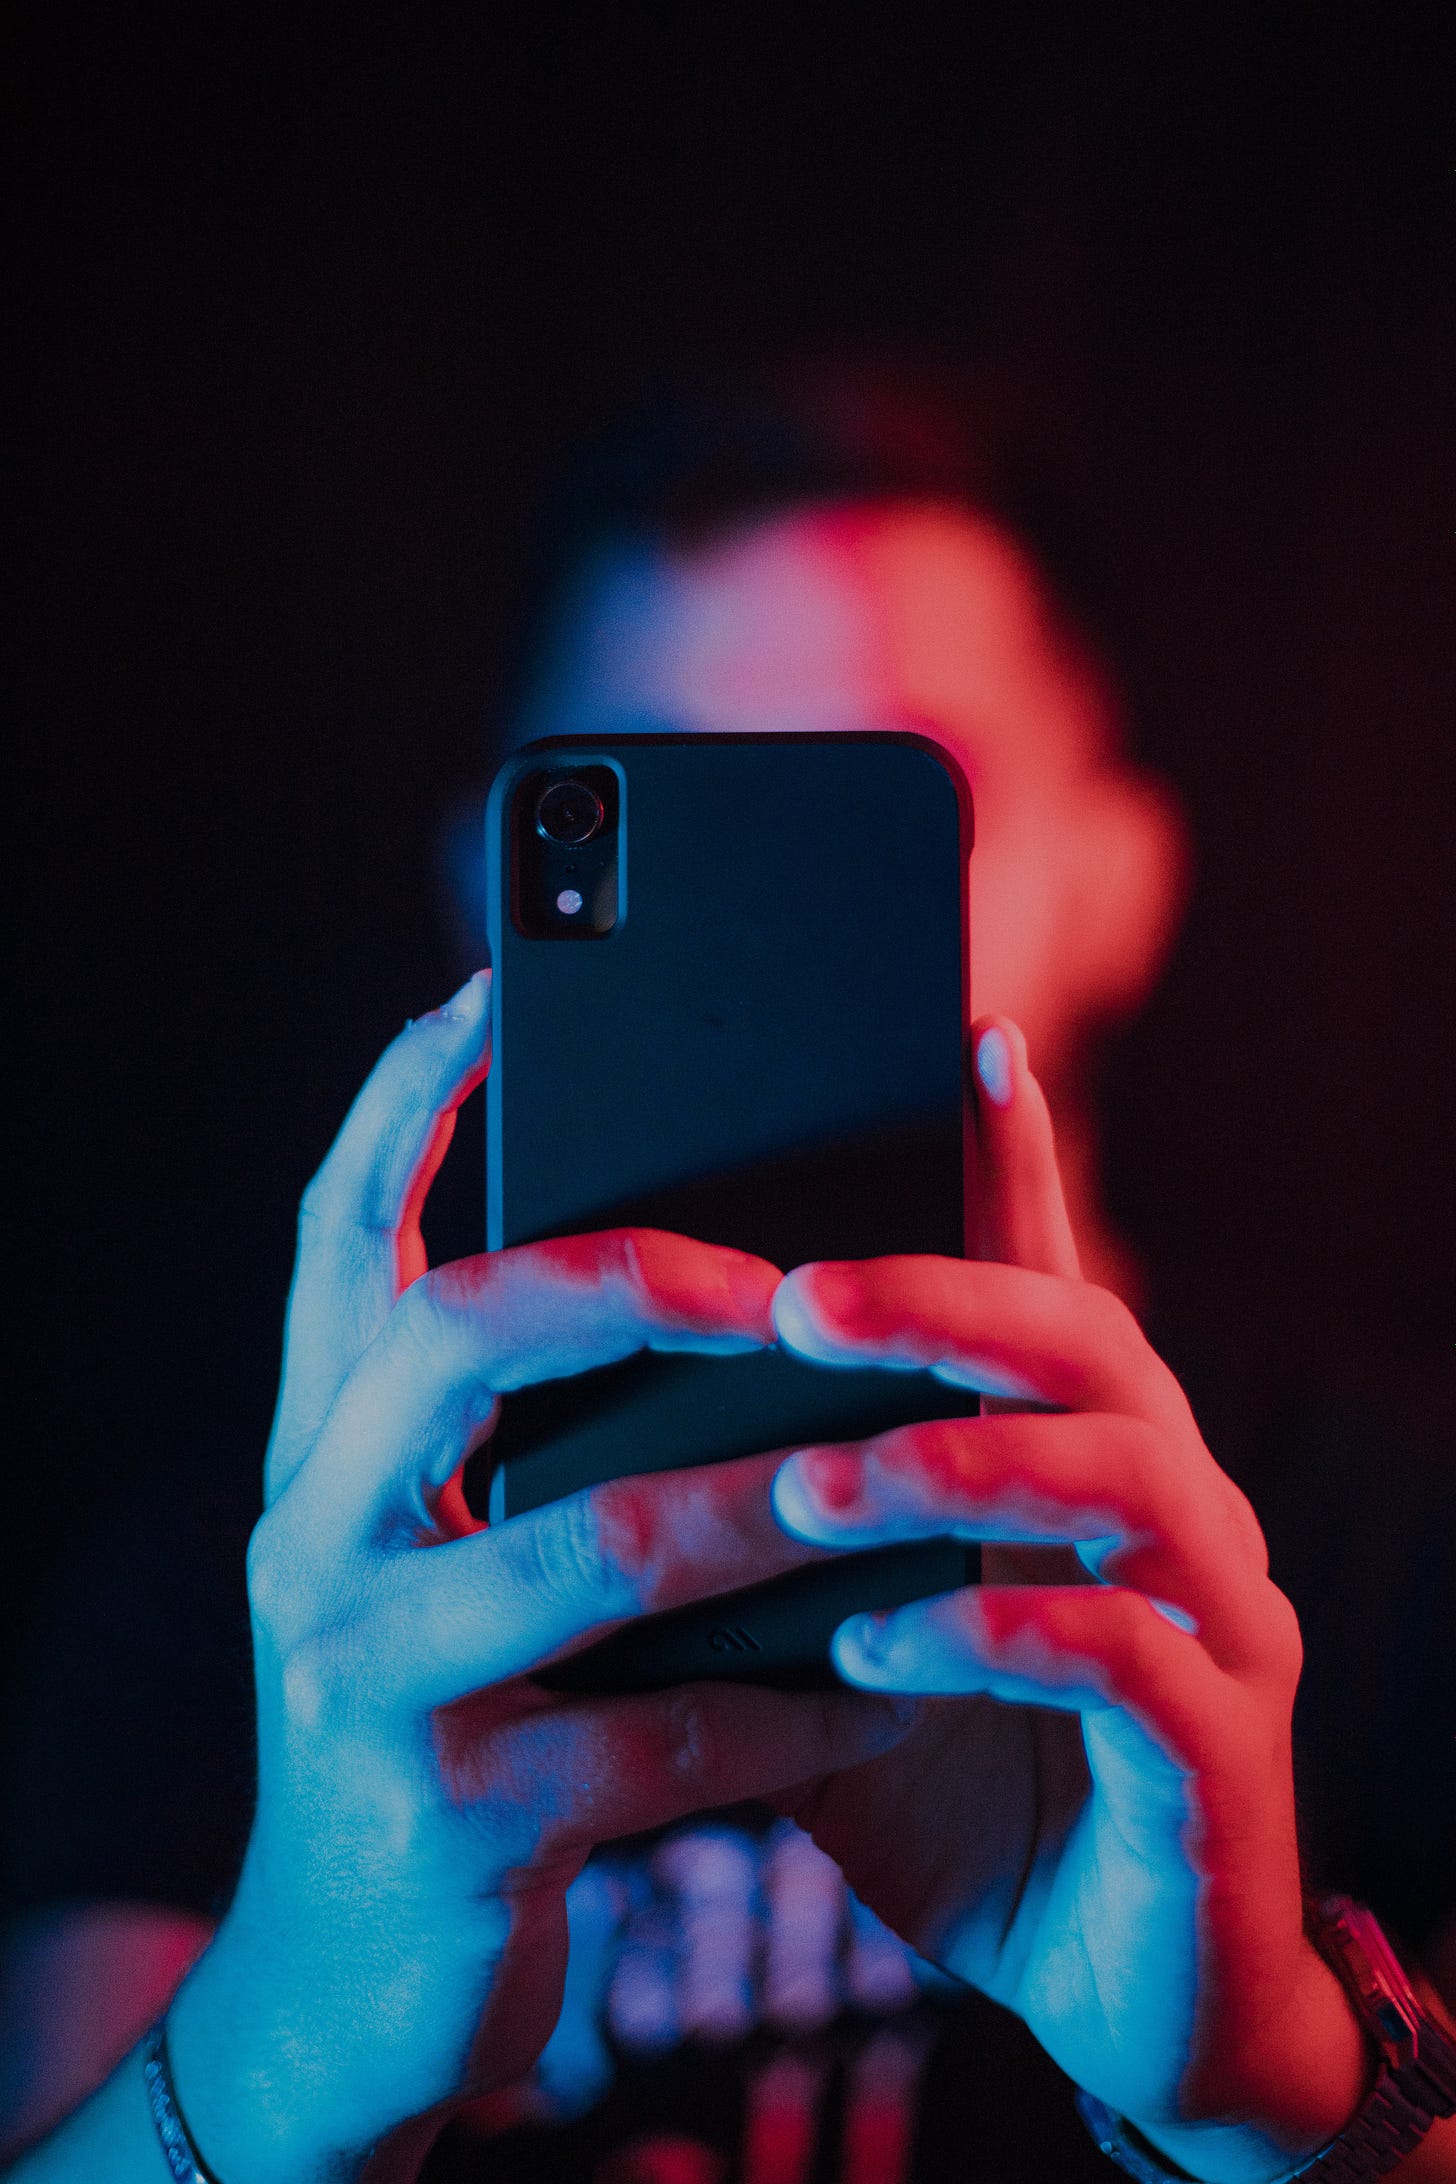 Photo of a person with a mobile phone in front of their face.